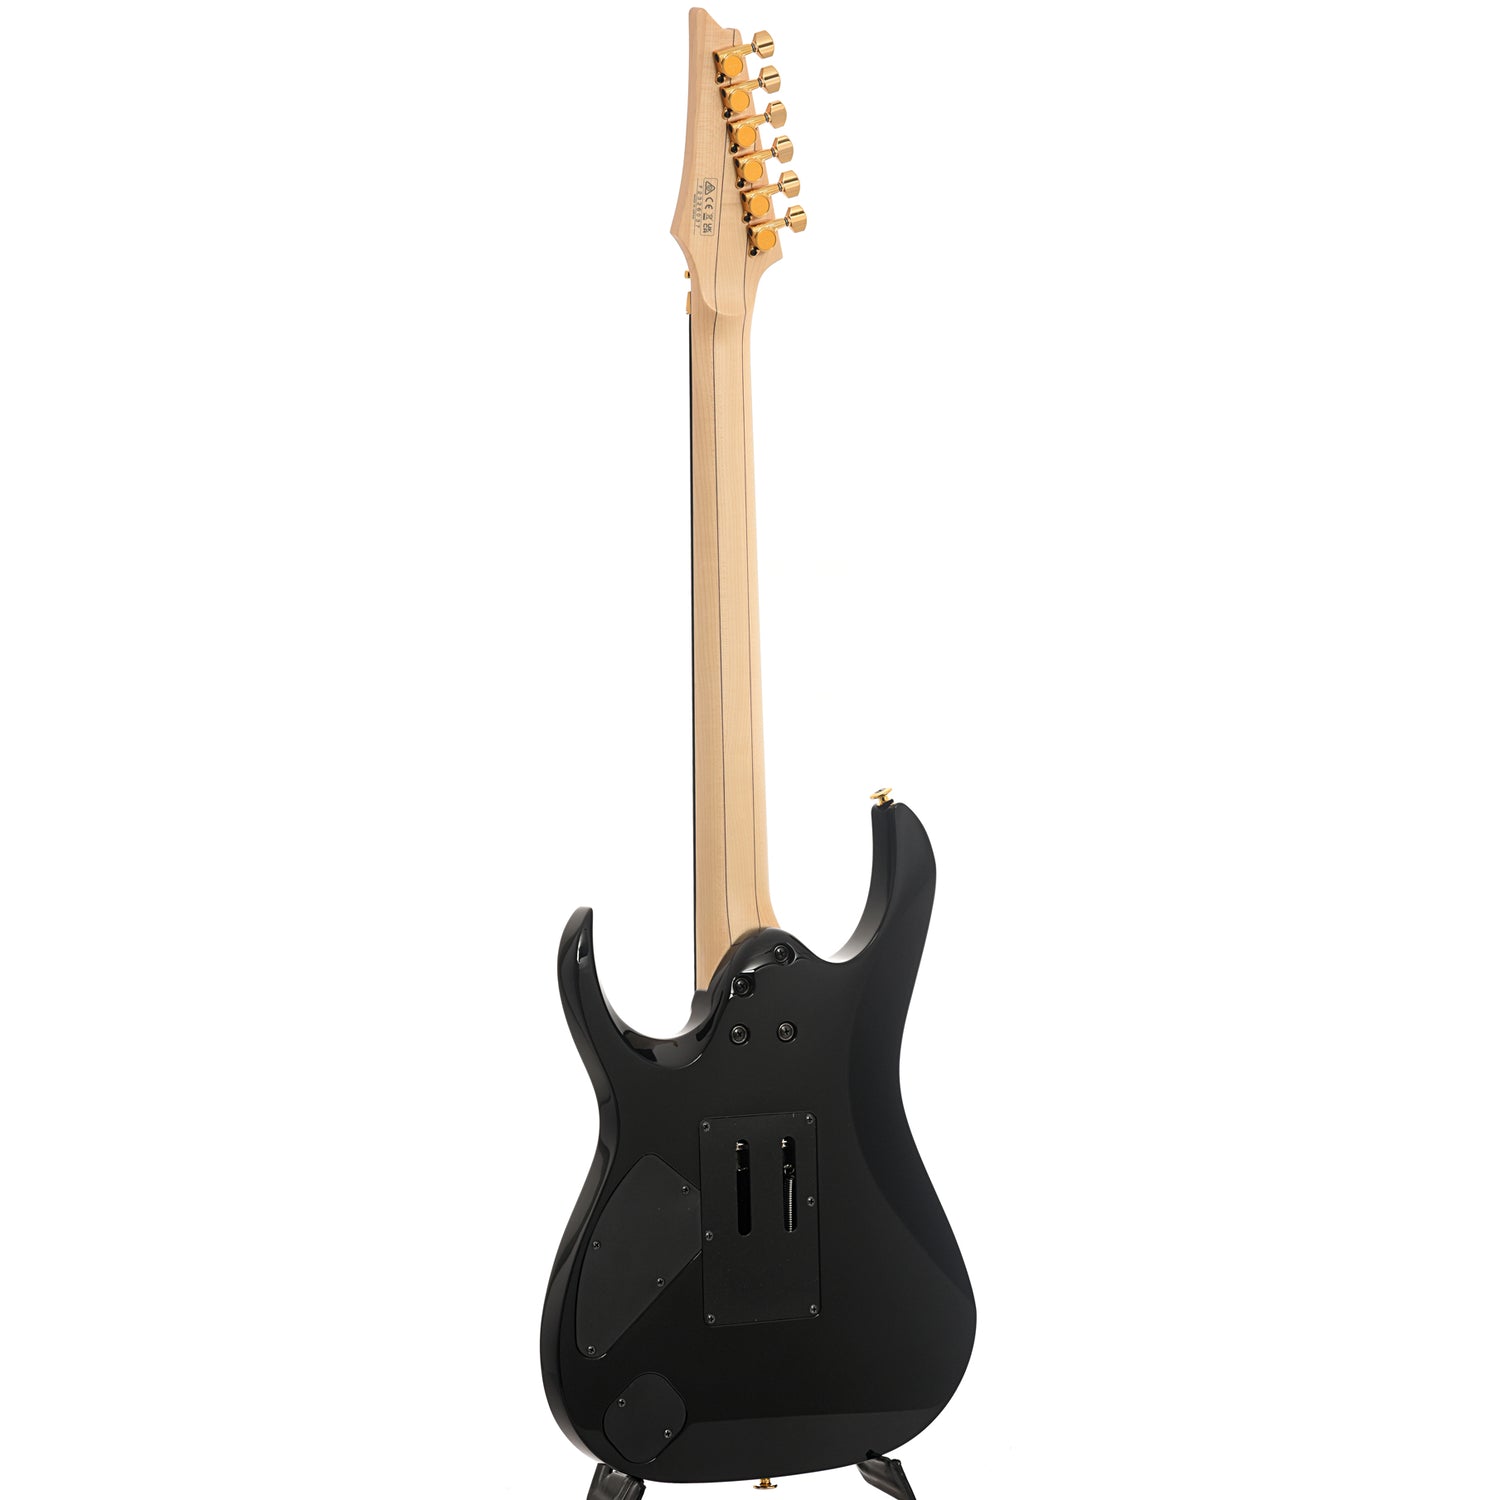 Full back and side of Ibanez Axe Design Lab Prestige Series RGA622XH Electric Guitar, Black